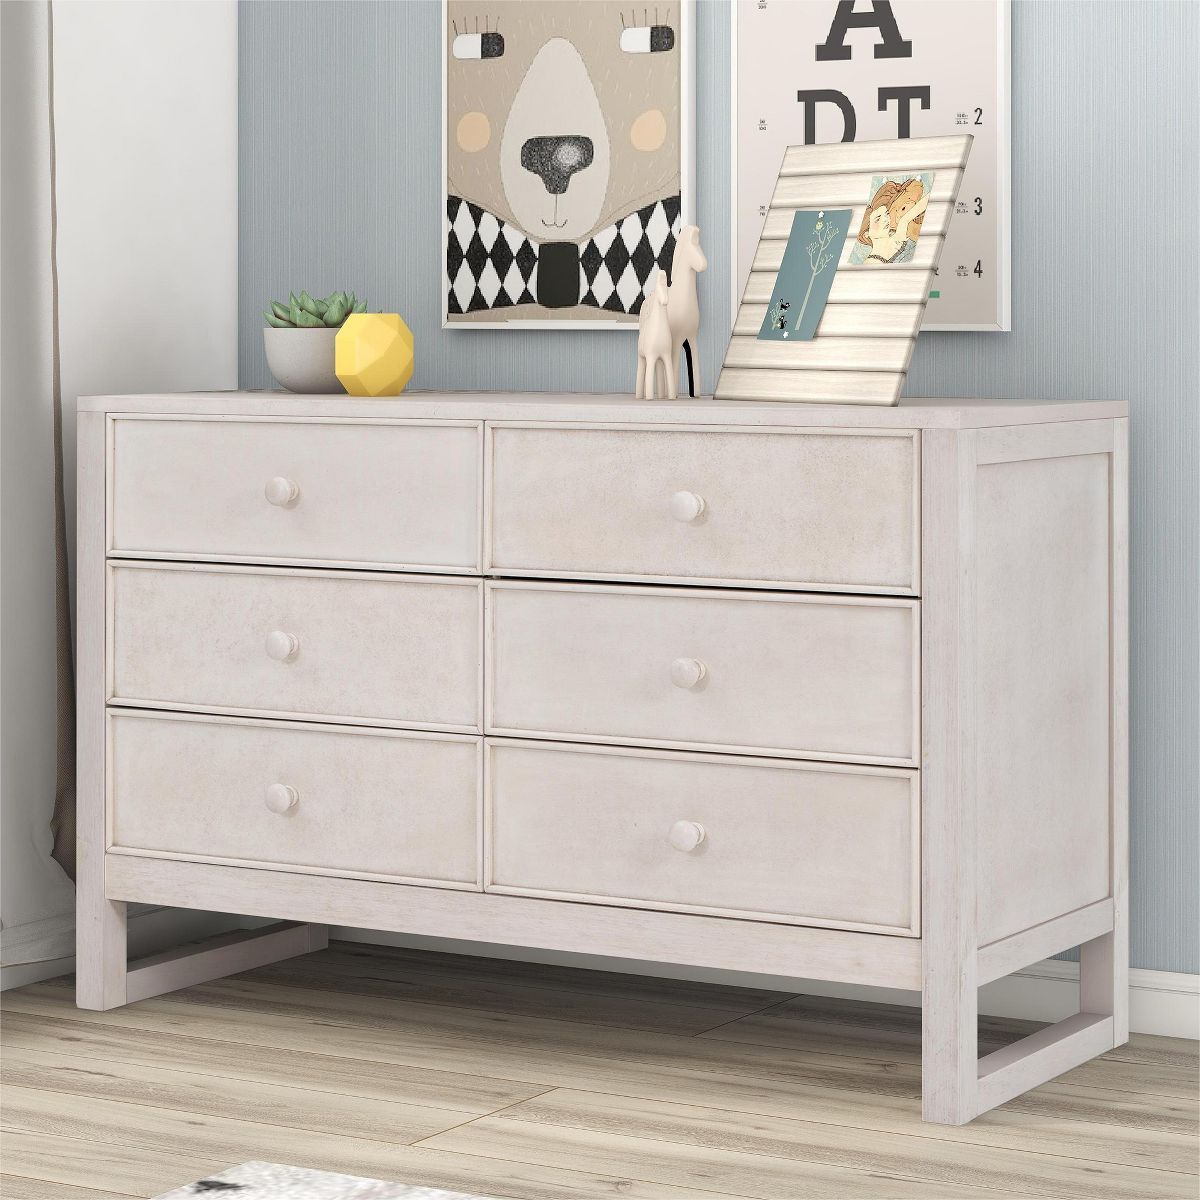 Rustic Wooden Dresser With 6 Drawers, Storage Cabinet For Bedroom - ModernLuxe | Target